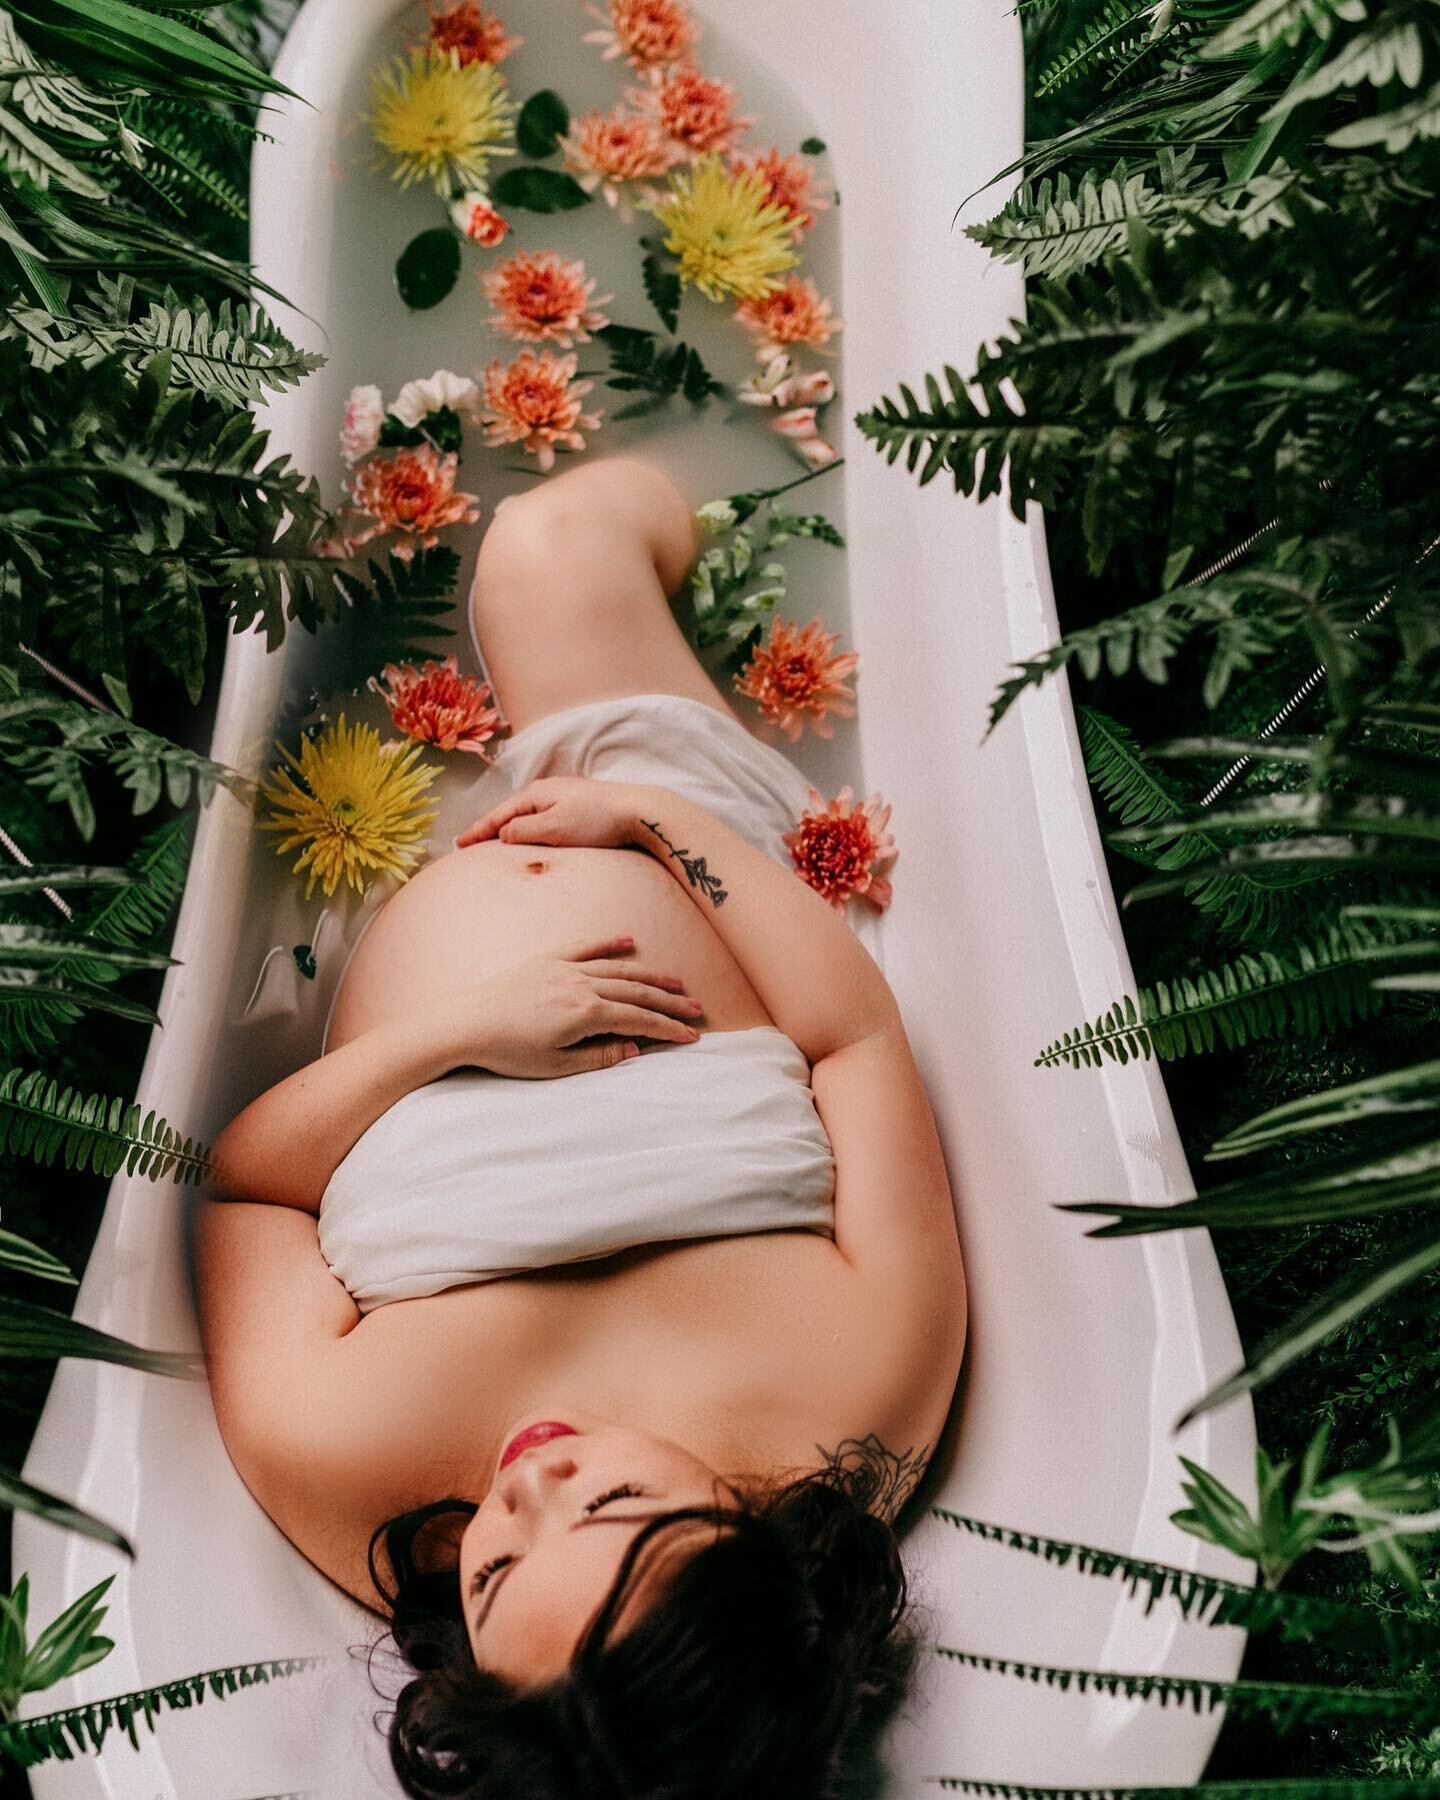 Milk / flower bath for maternity session 🥰🌸 this session was super fun 
 Shot at @may11studiowpg